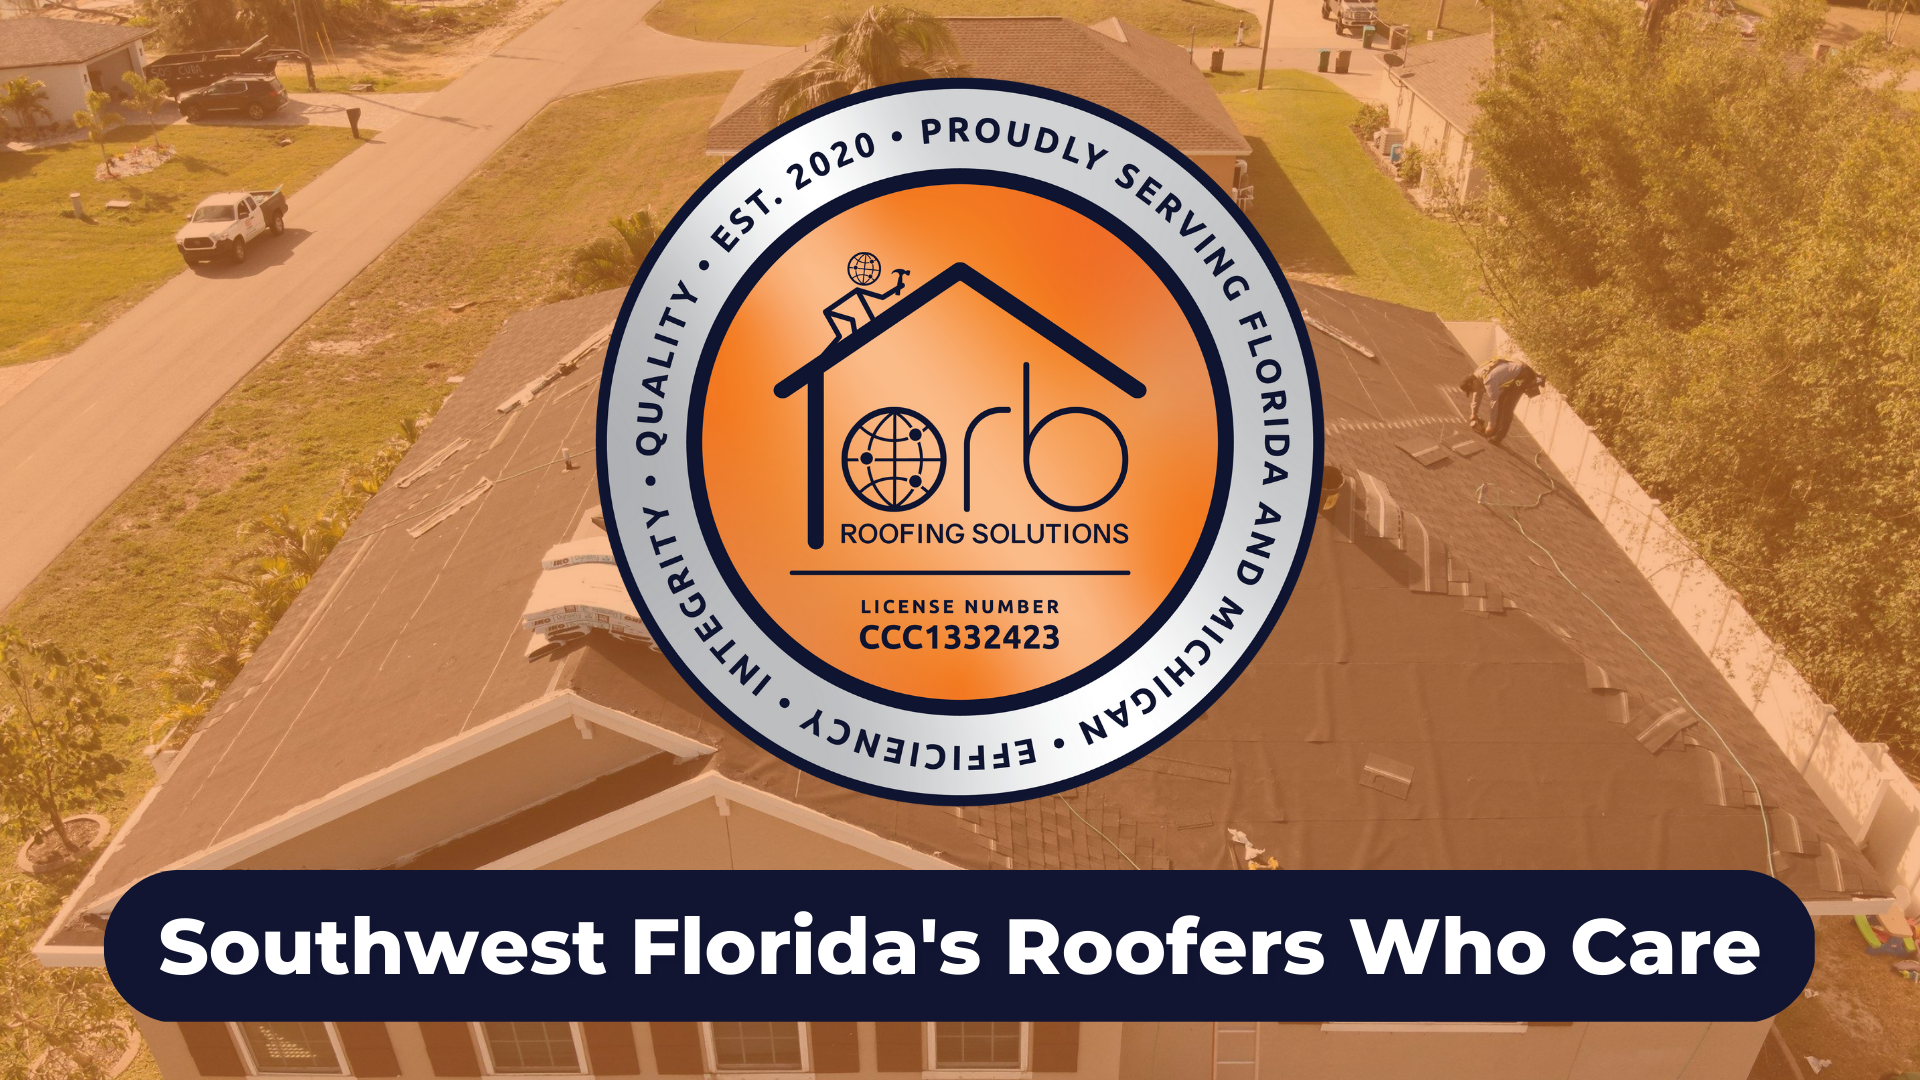 ORB Roofing Solutions Speaks on Roofing Needs Around Cape Coral